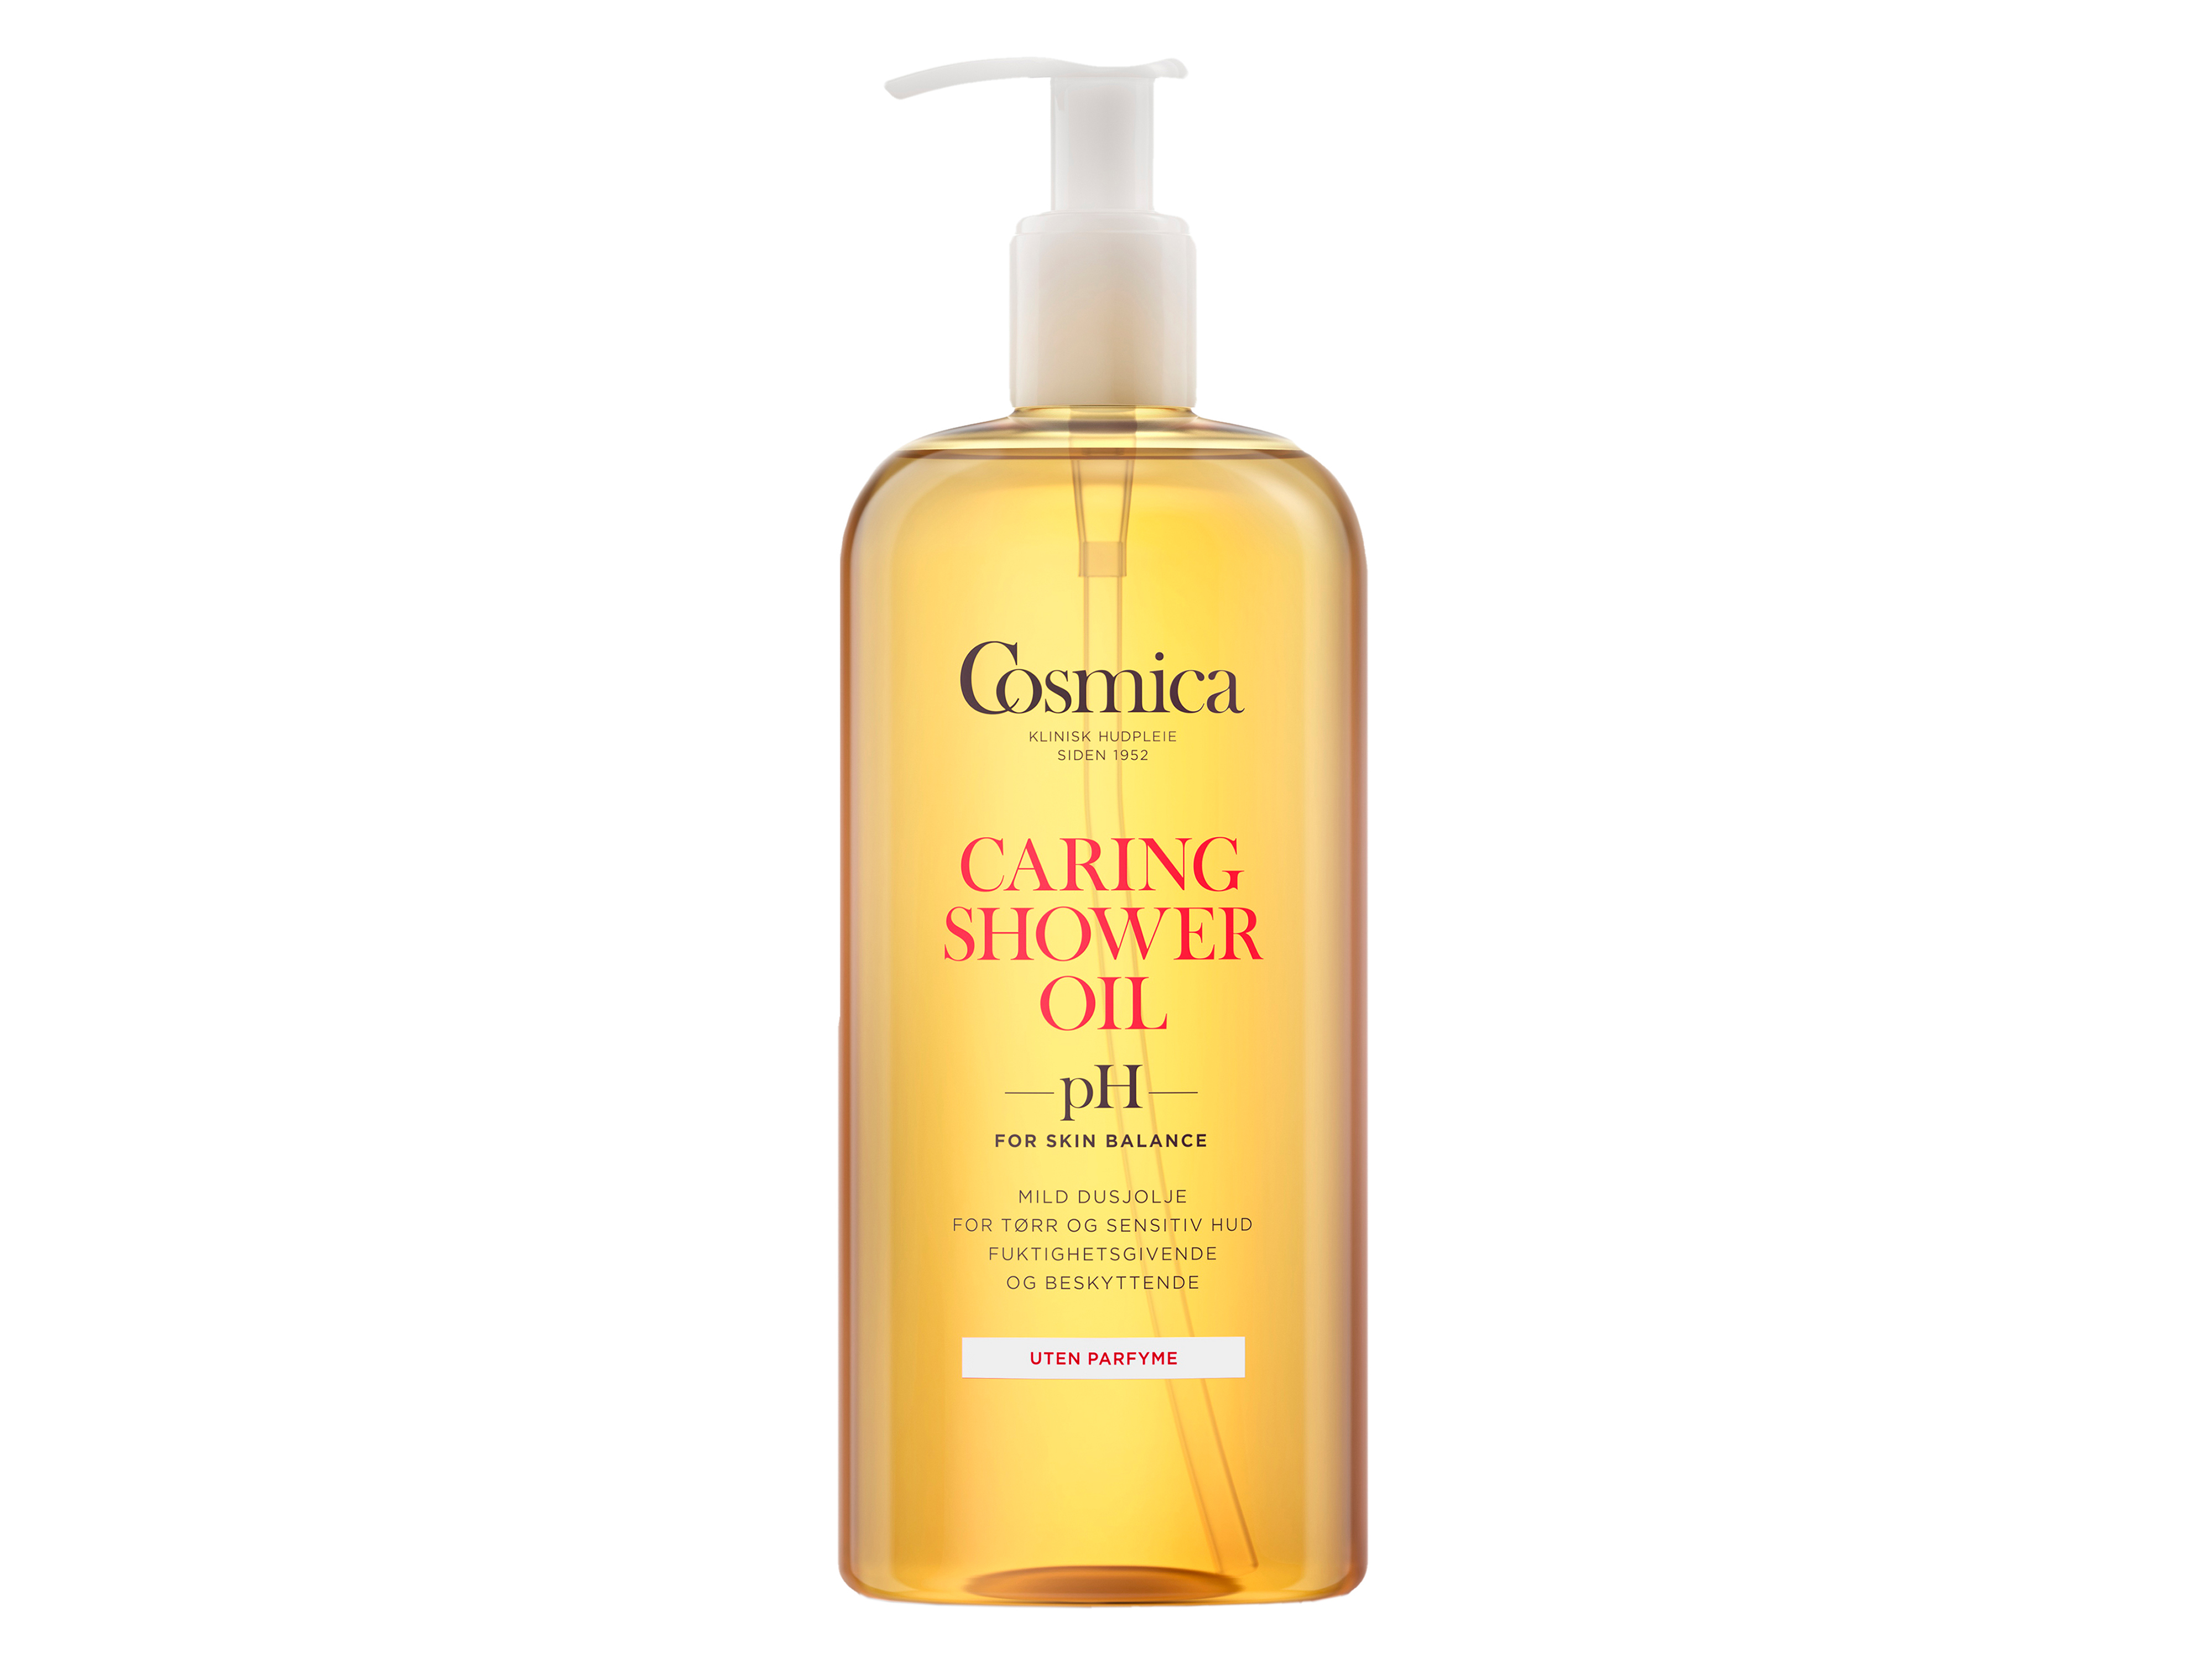 Cosmica Caring Shower Oil Uparfymert, 400 ml